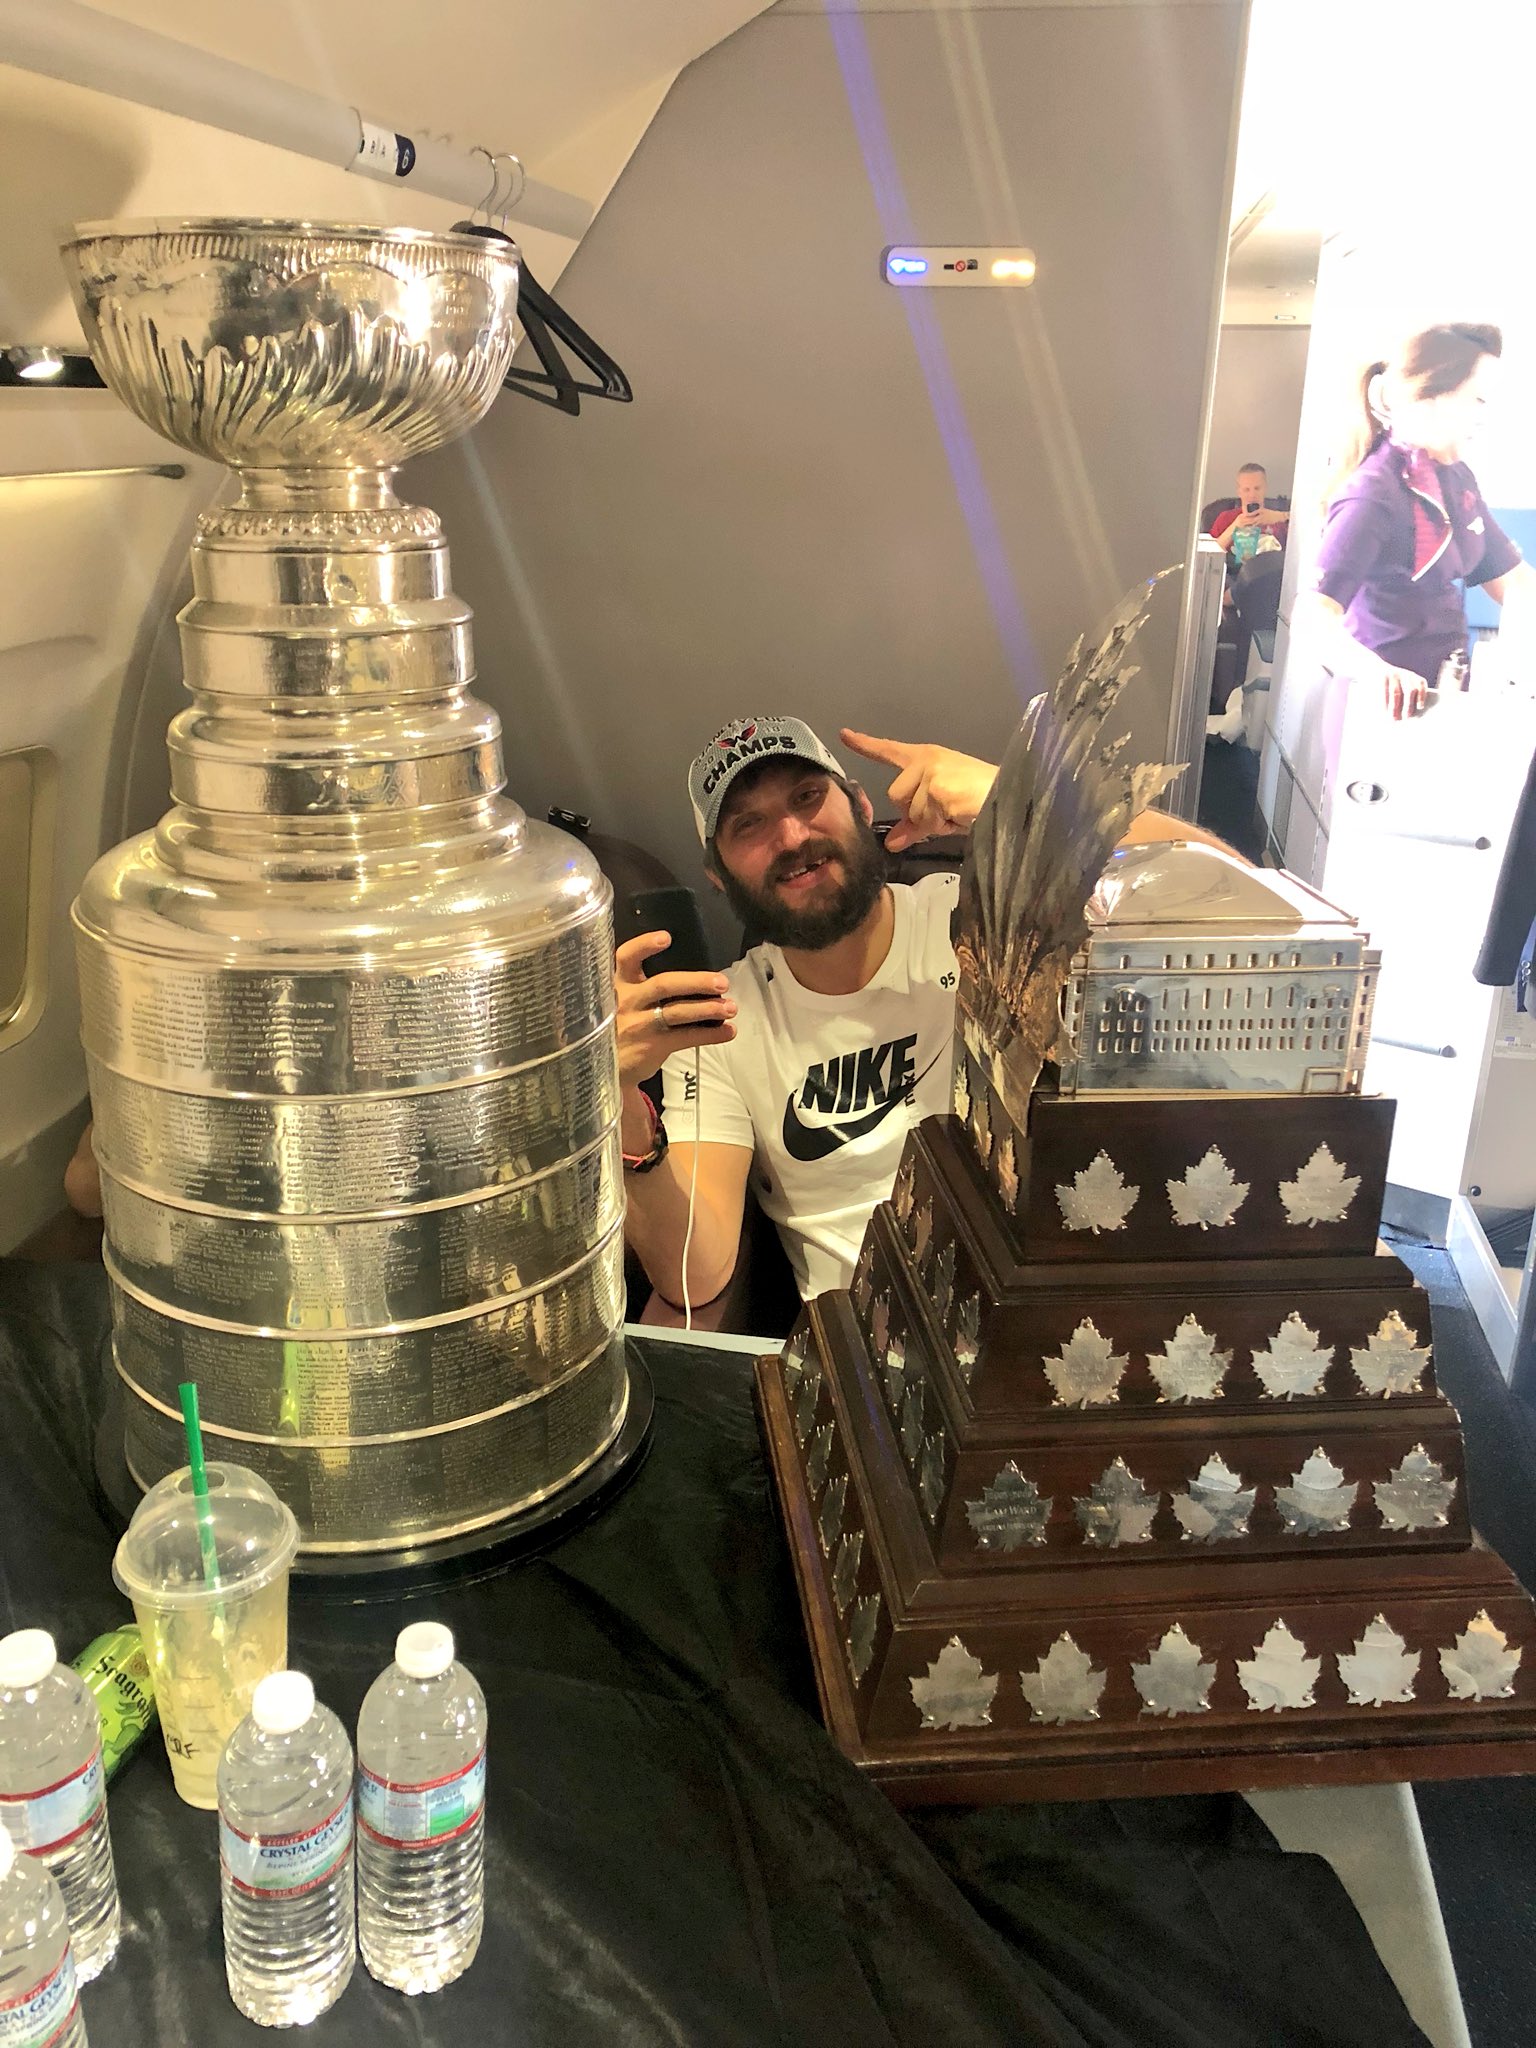 Meet the Stanley Cup Baby born 9 months to the day after the Capitals won  it all